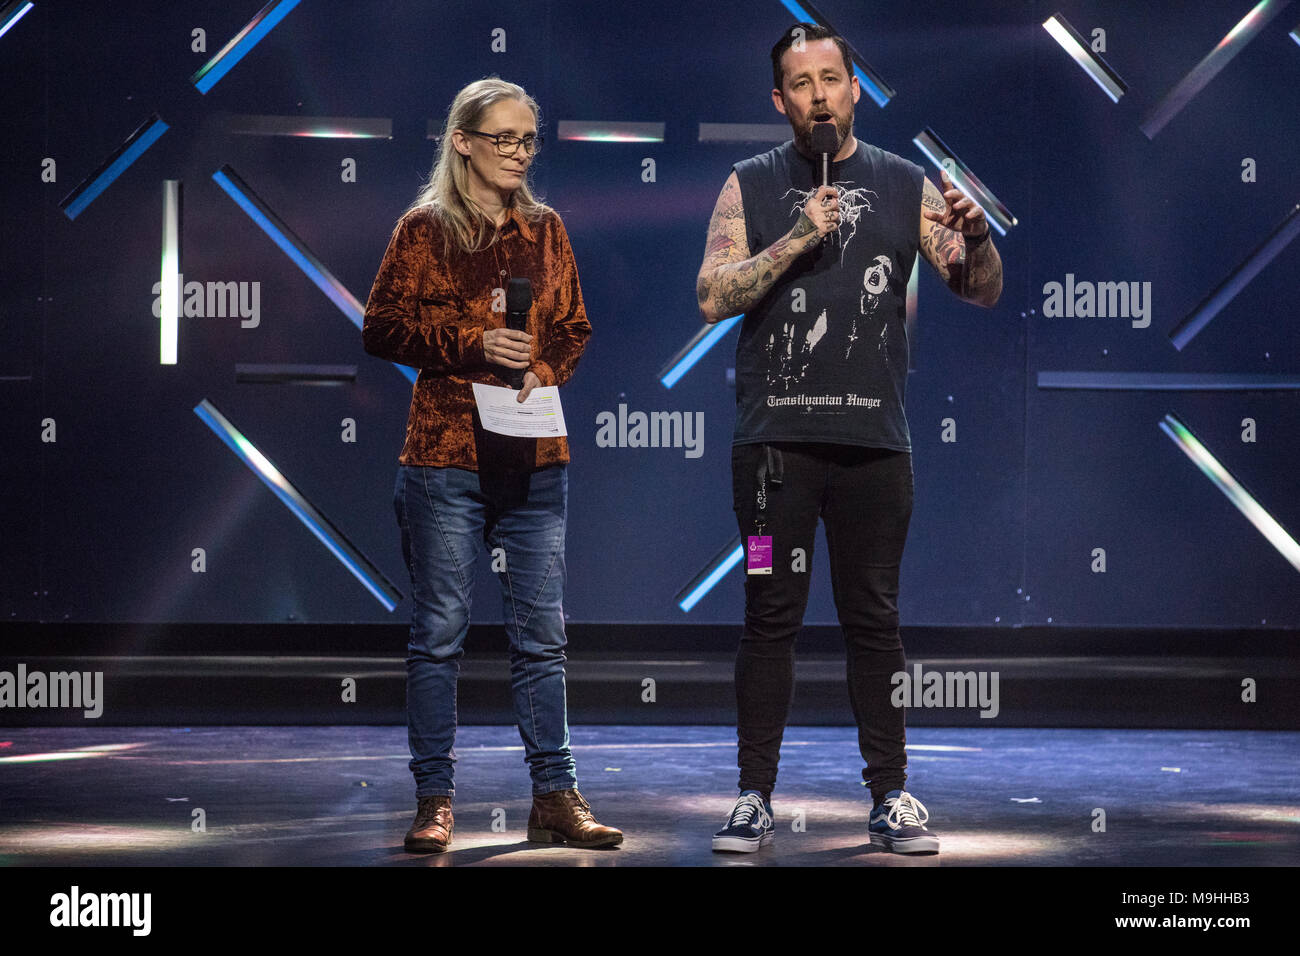 Norway, Oslo - February 25, 2018. The Norwegian musician Tarjei Strøm is hosting the Norwegian Grammy Awards, Spellemannprisen 2017, at Oslo Konserthus in Oslo. Here he is seen with May-Irene Aasen (L). (Photo credit: Gonzales Photo - Stian S. Moller). Stock Photo